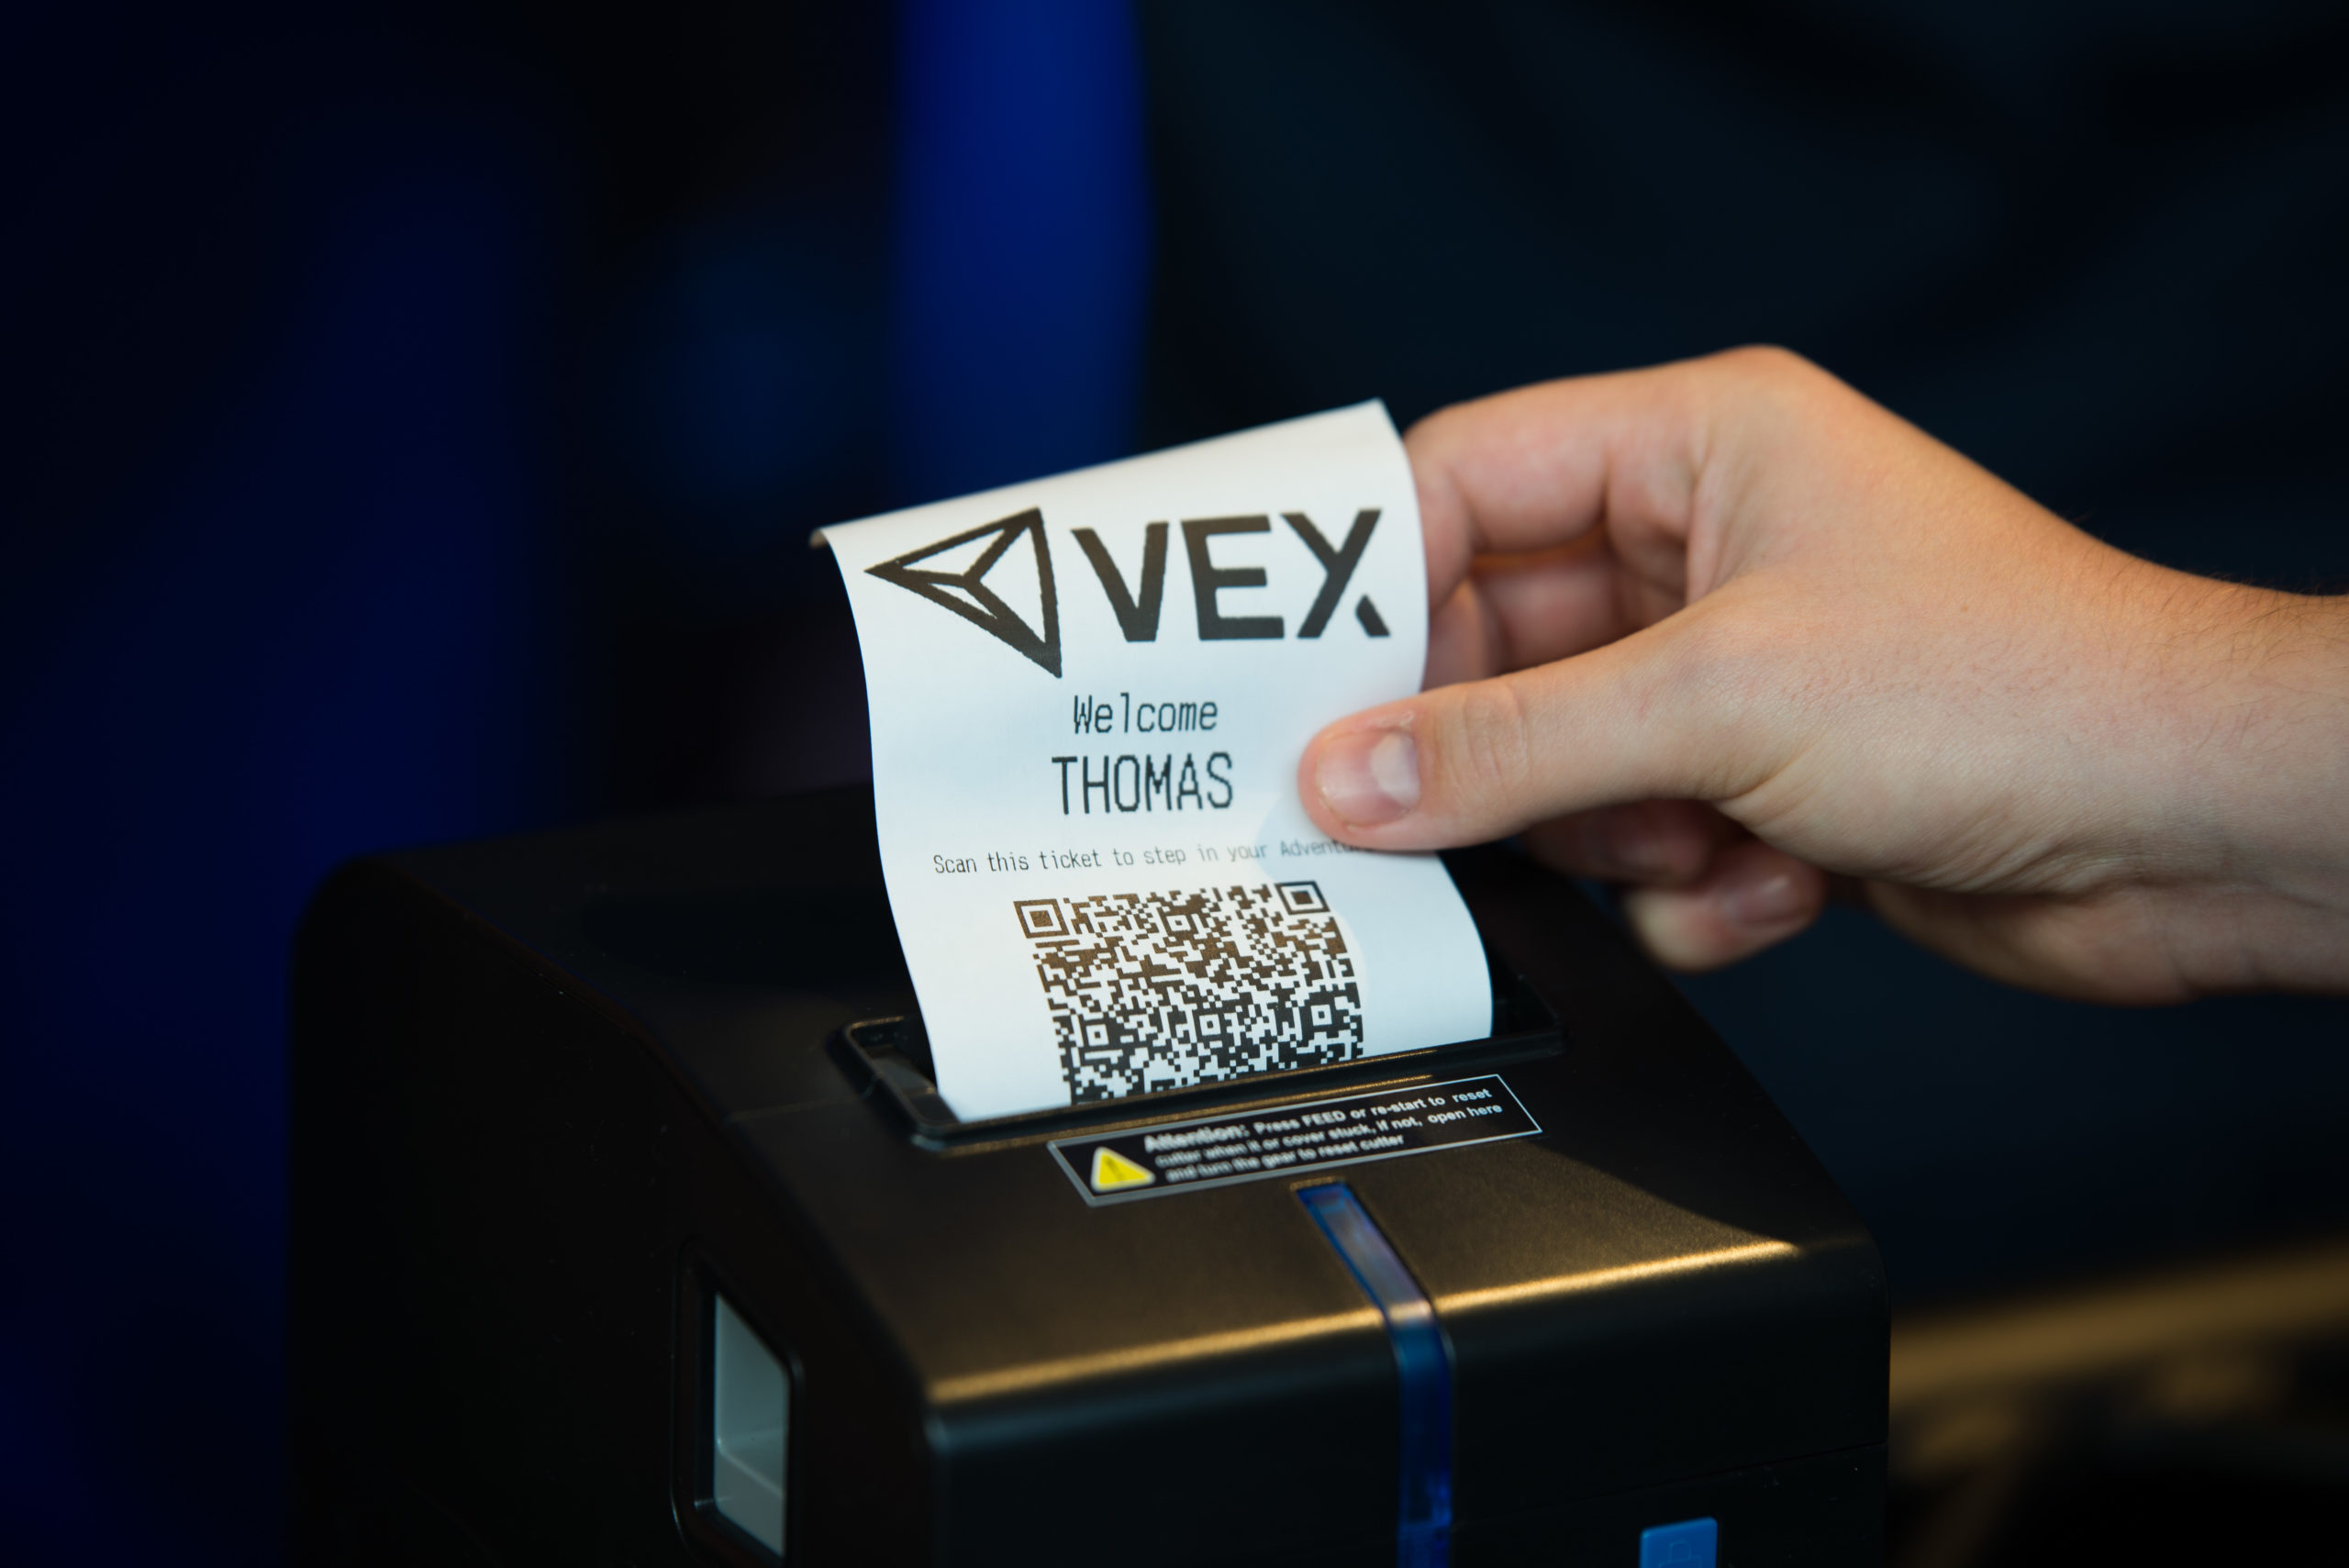 Easy-to-use ticket system to register and VEX eSports League